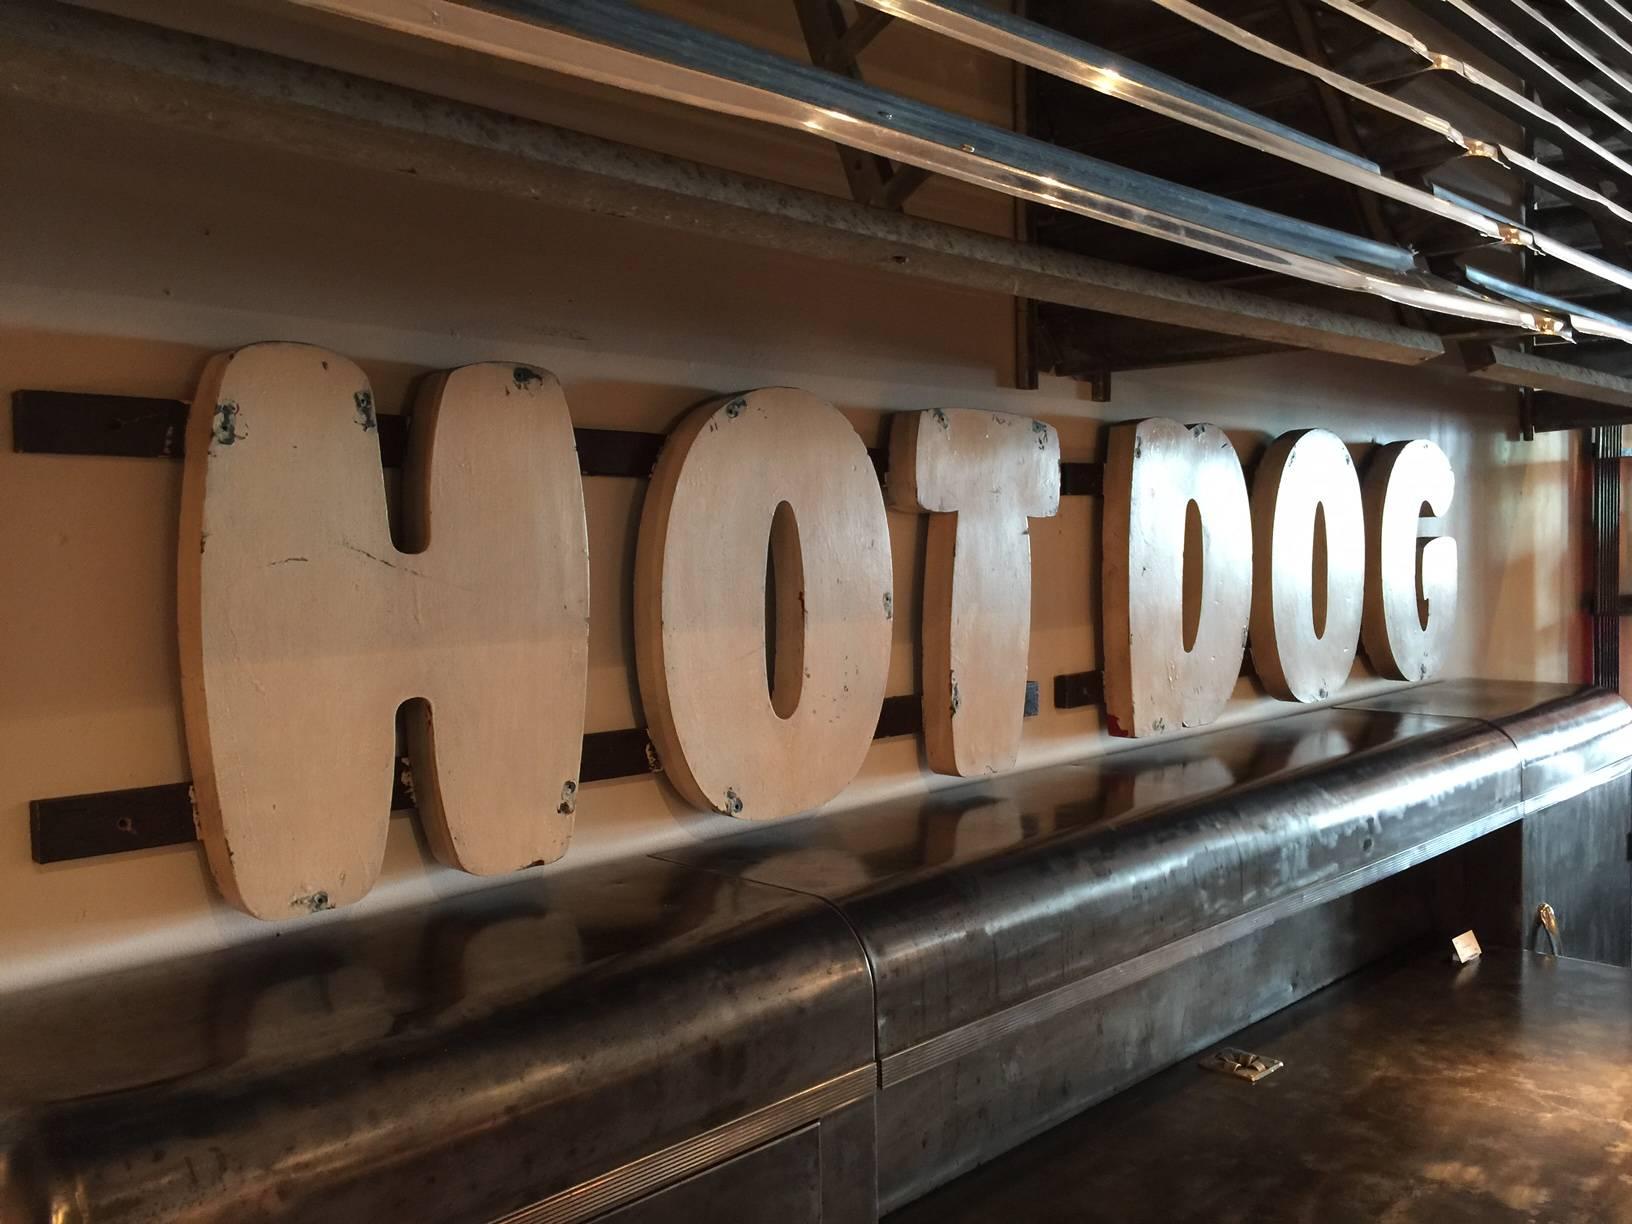 Off-white wooden hot dog sign from 1970s San Francisco restaurant.